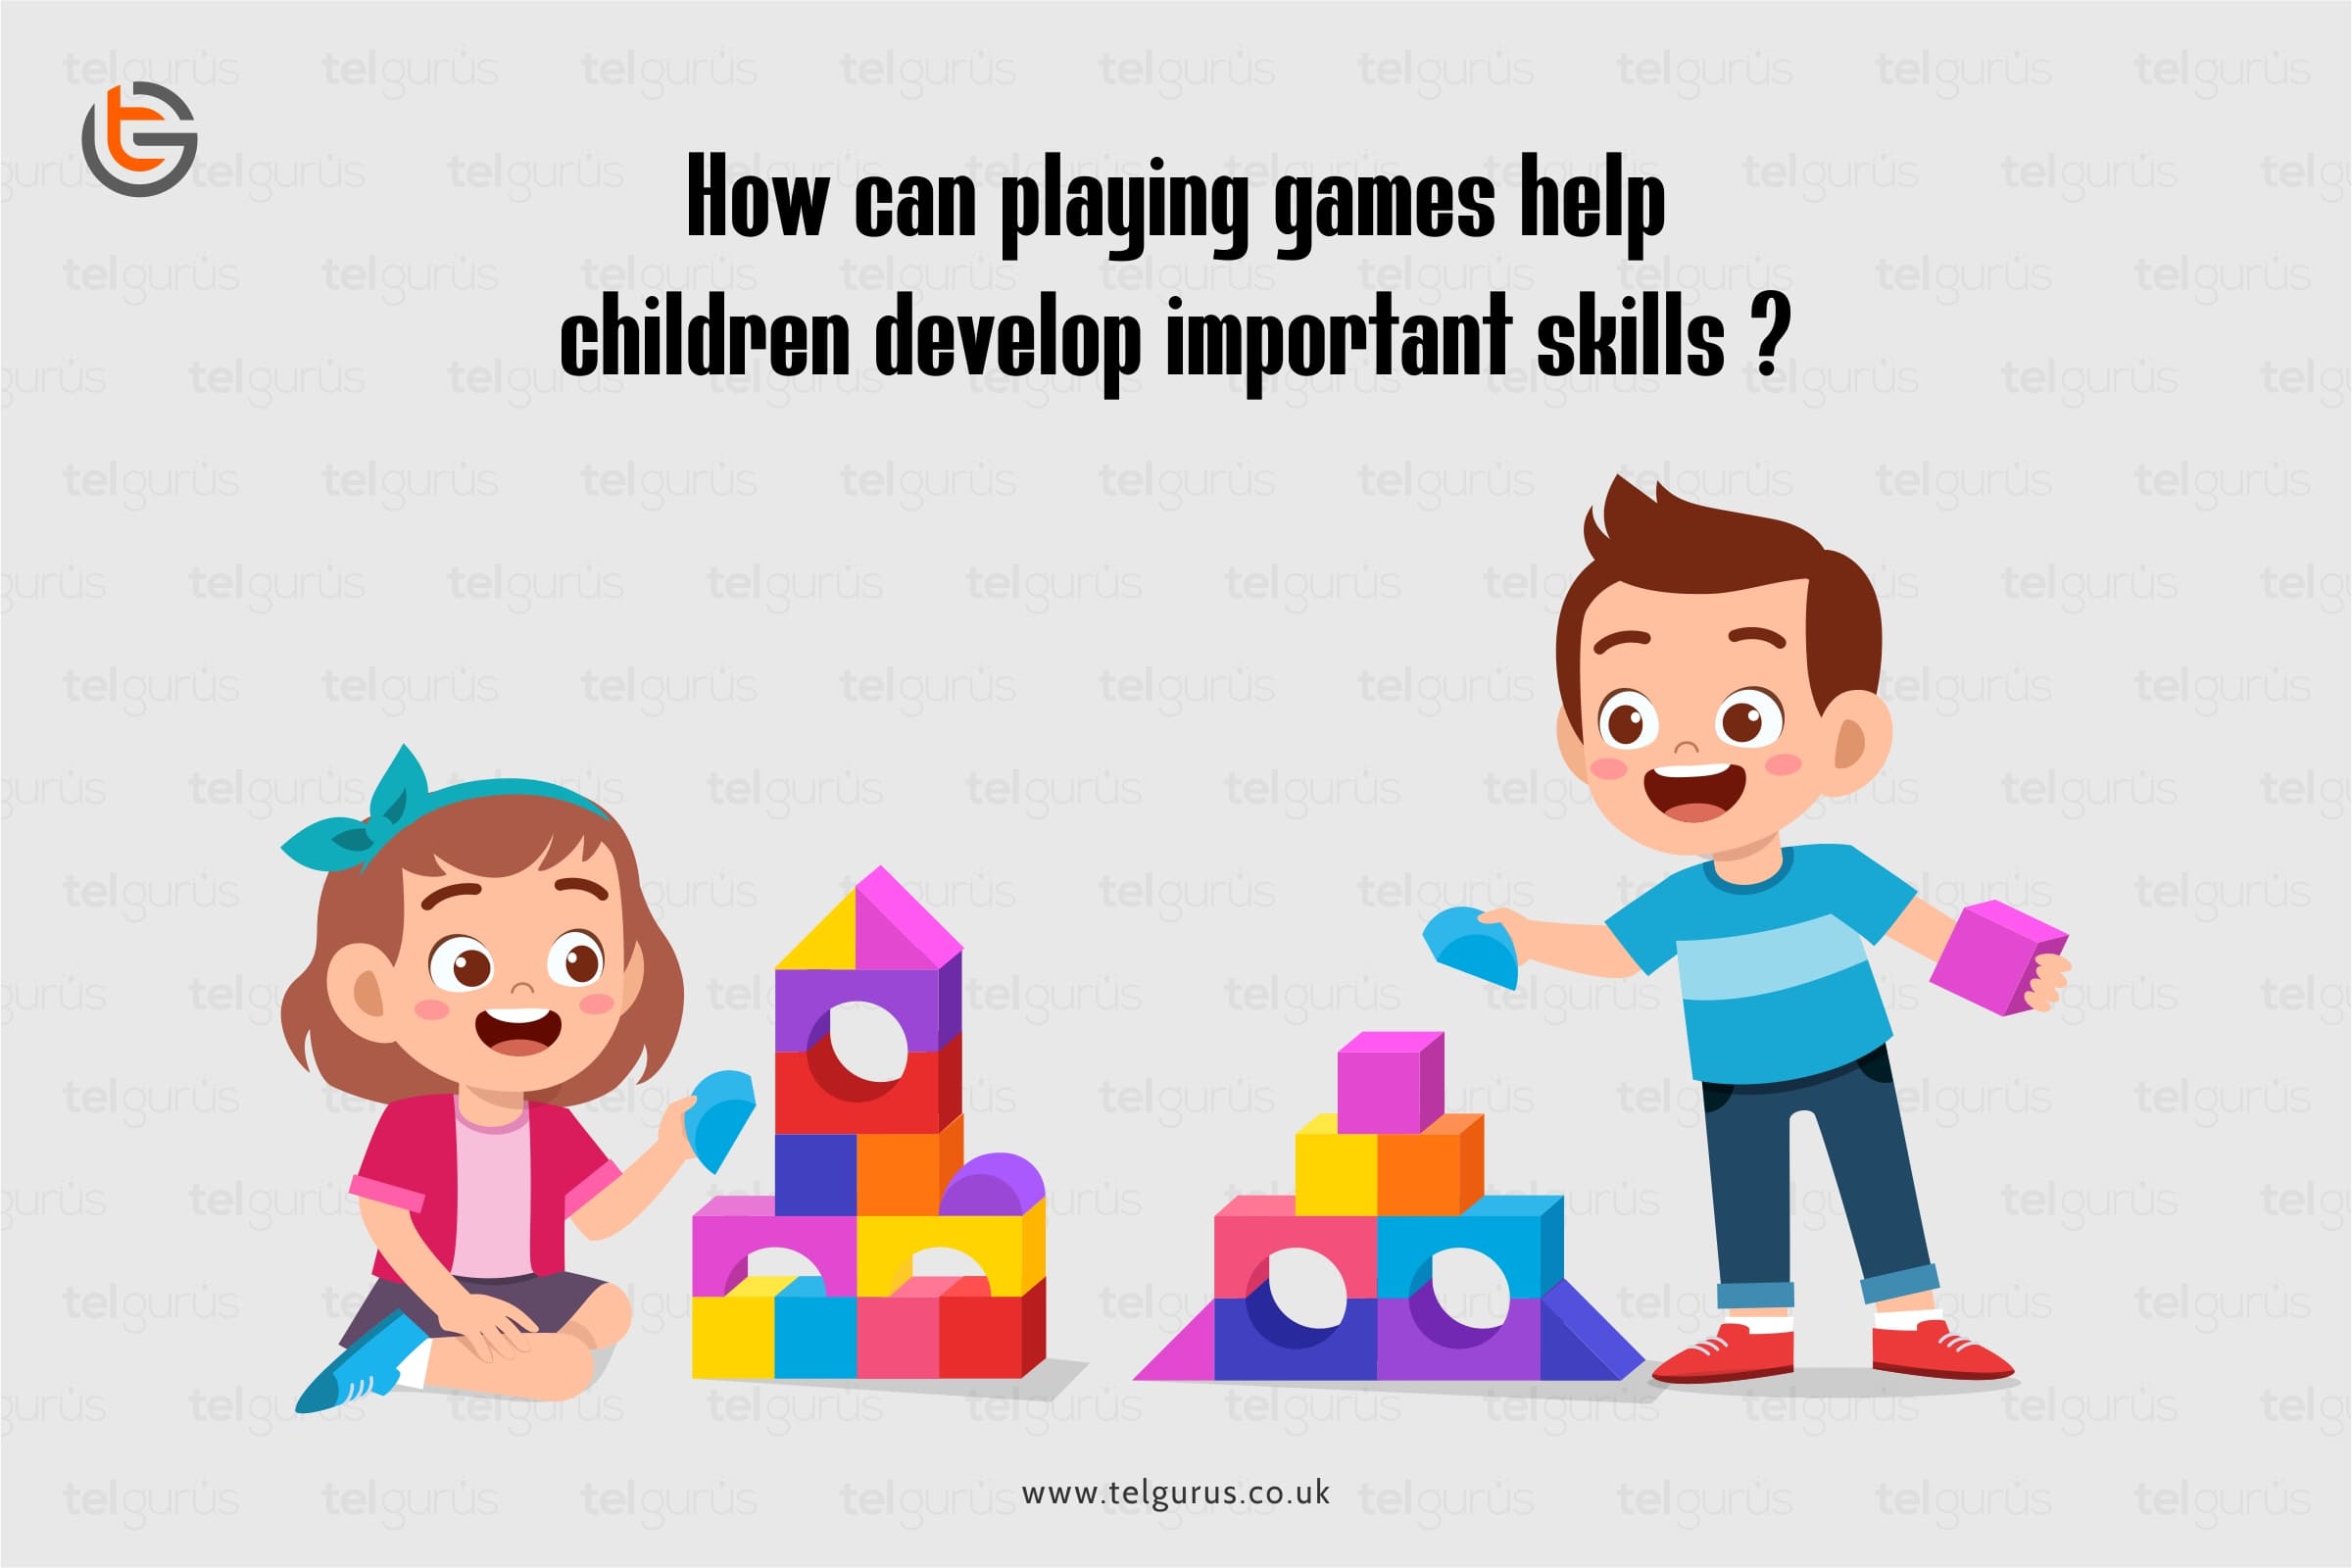 How can playing games help children develop important skills